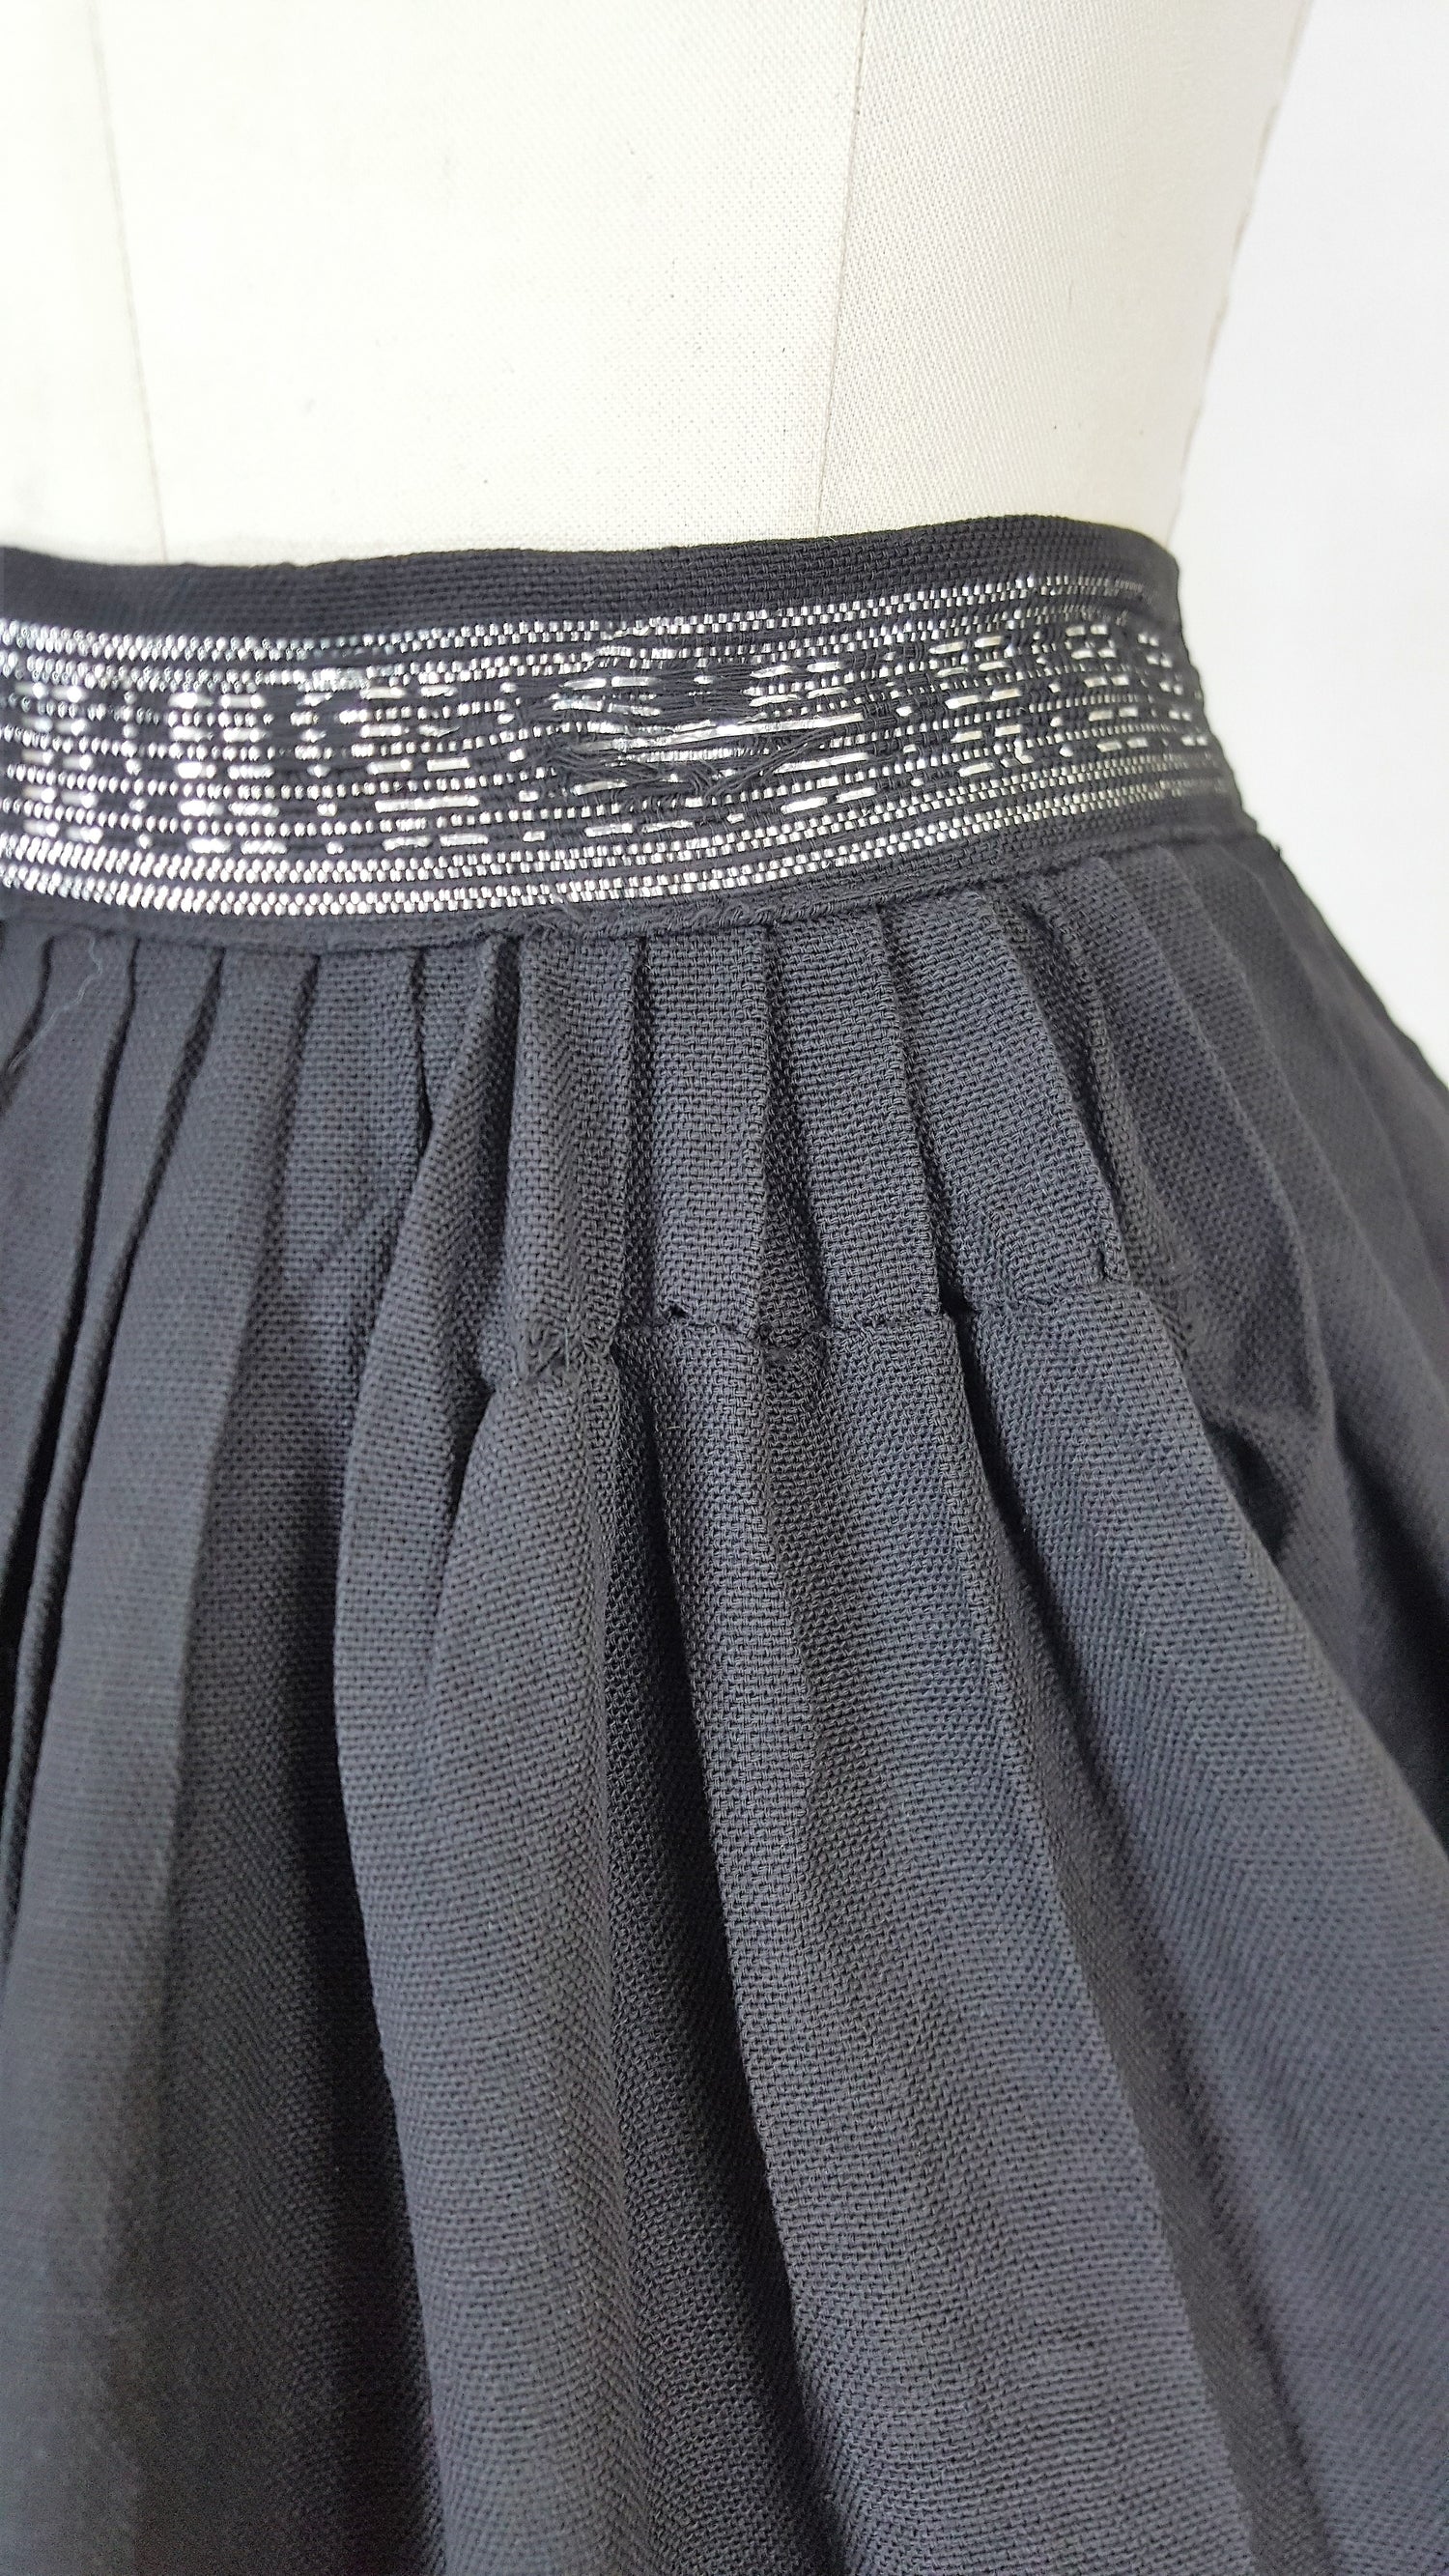 Vintage 1950s Black Full Circle Skirt With Silver Thread Embroidery ...